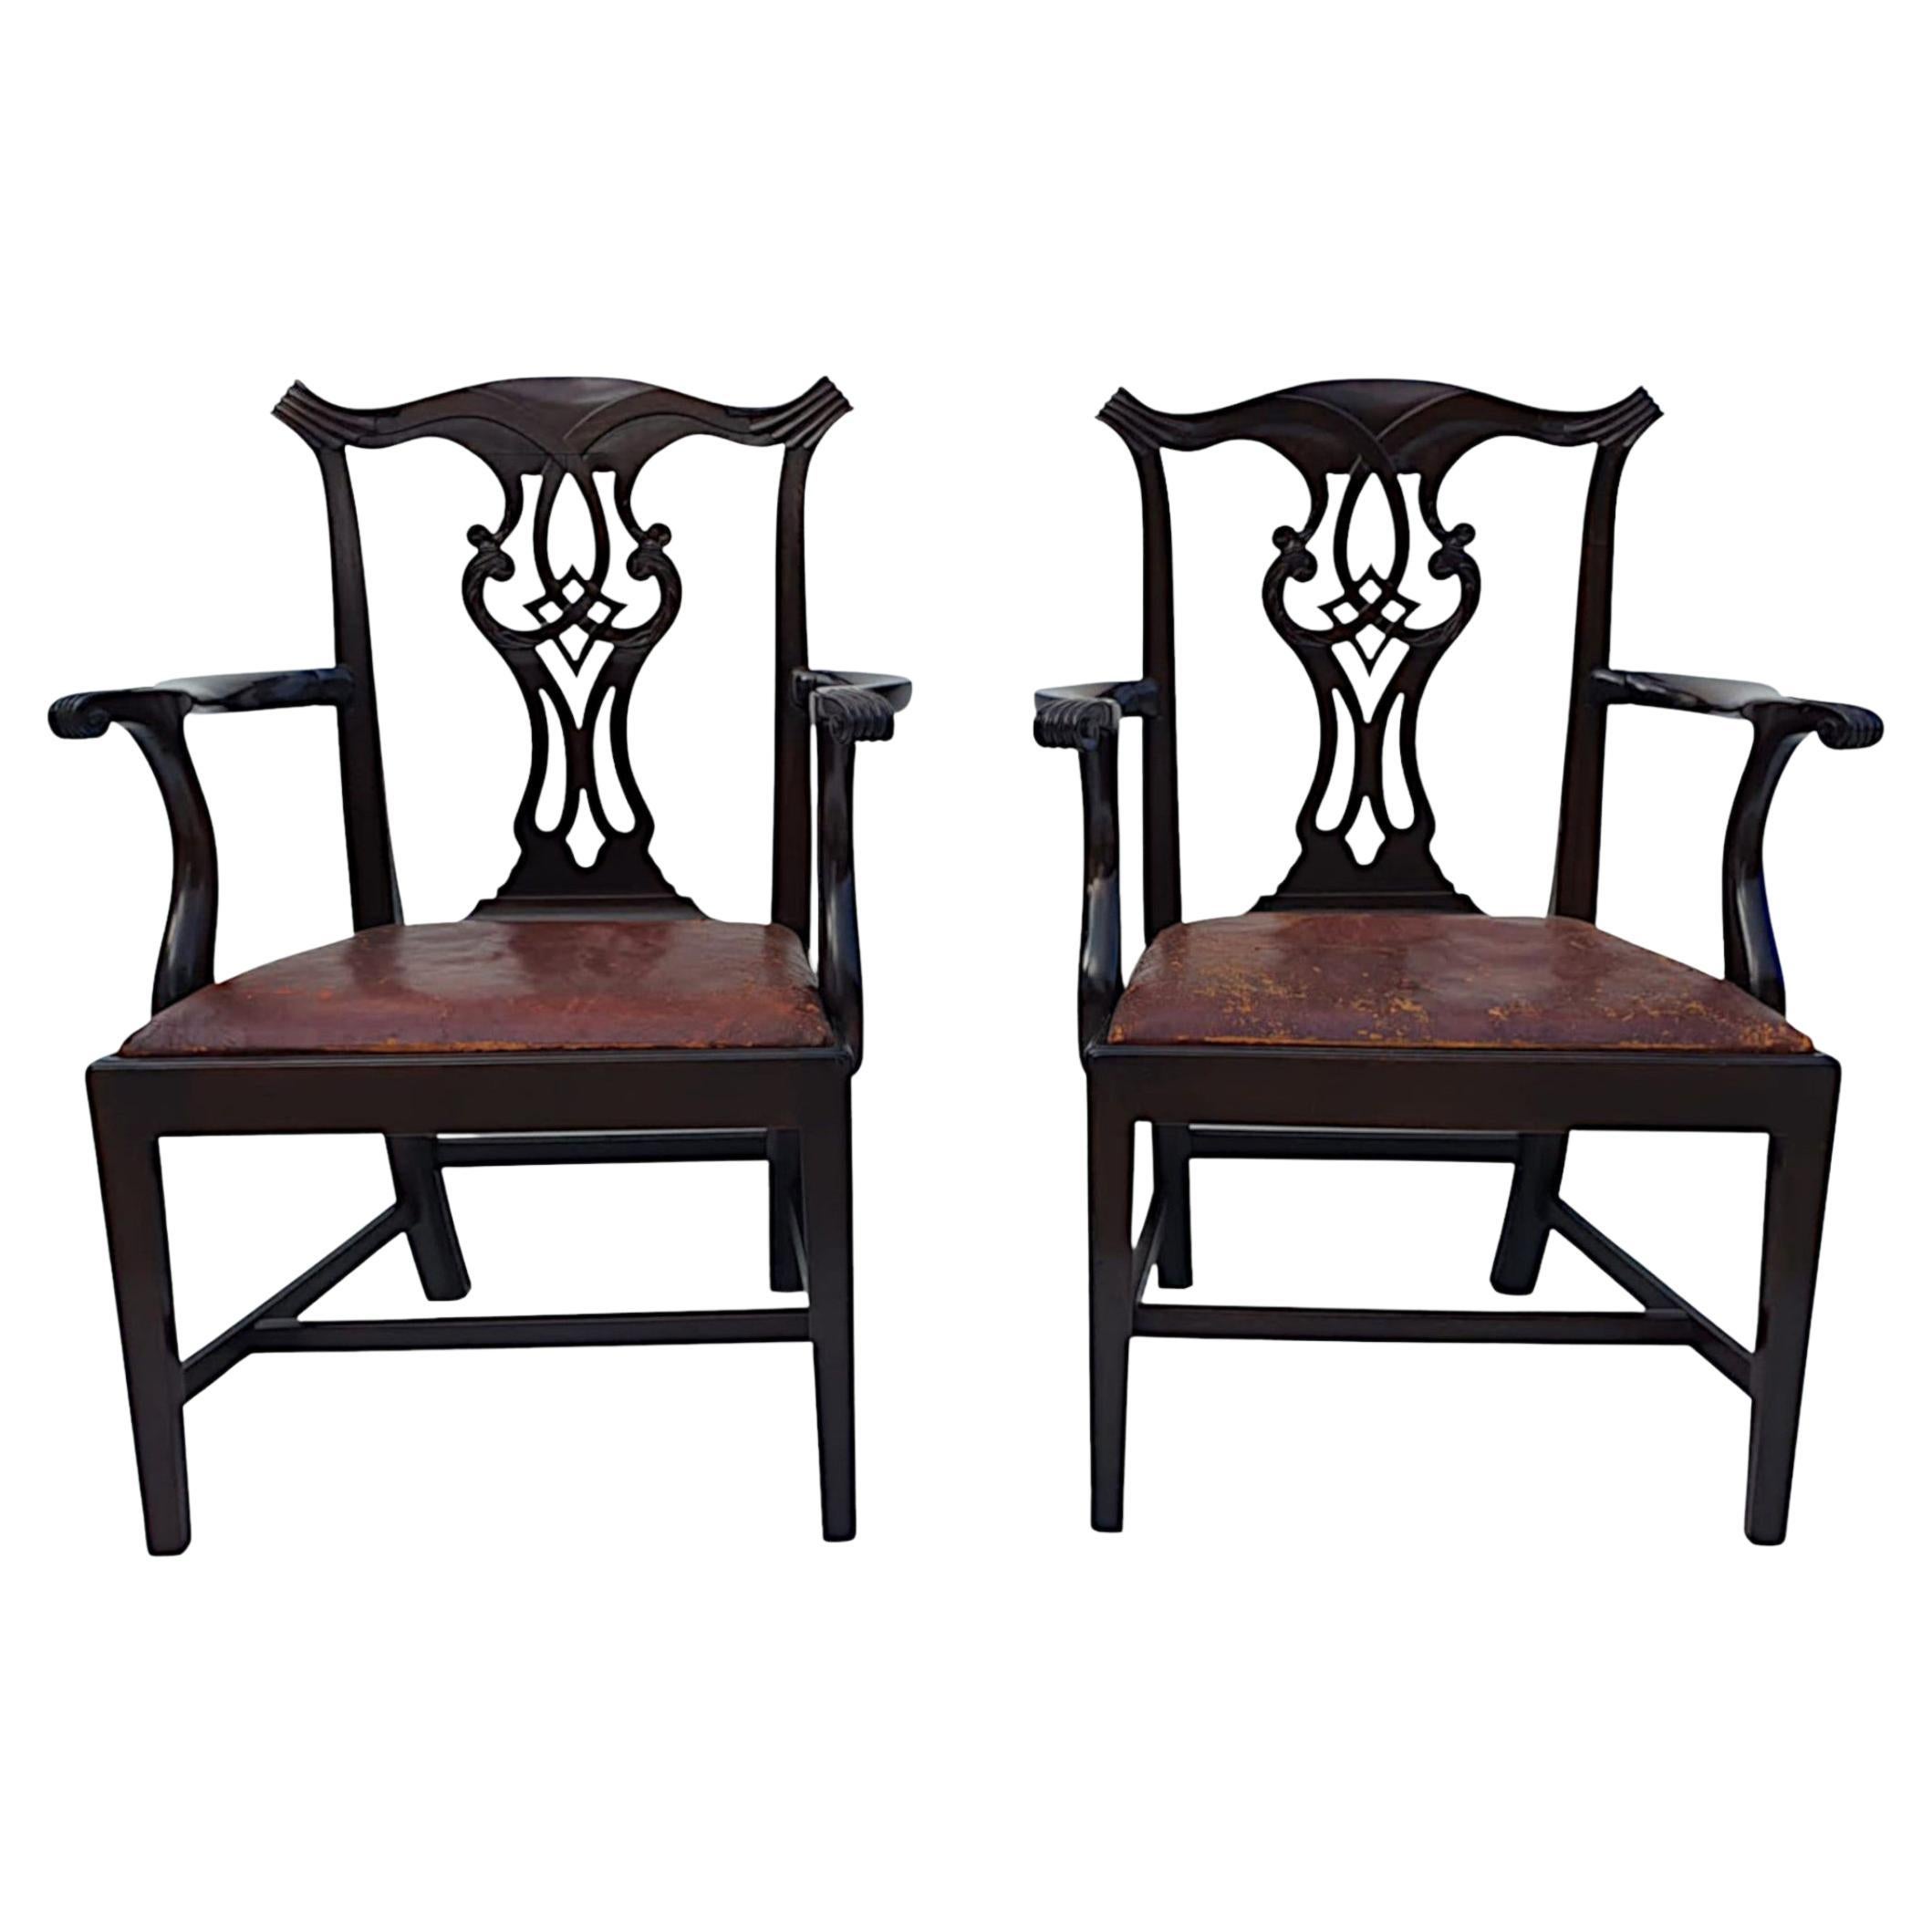 Stunning Pair of 19th Century Georgian Design Armchairs After Thomas Chippendale